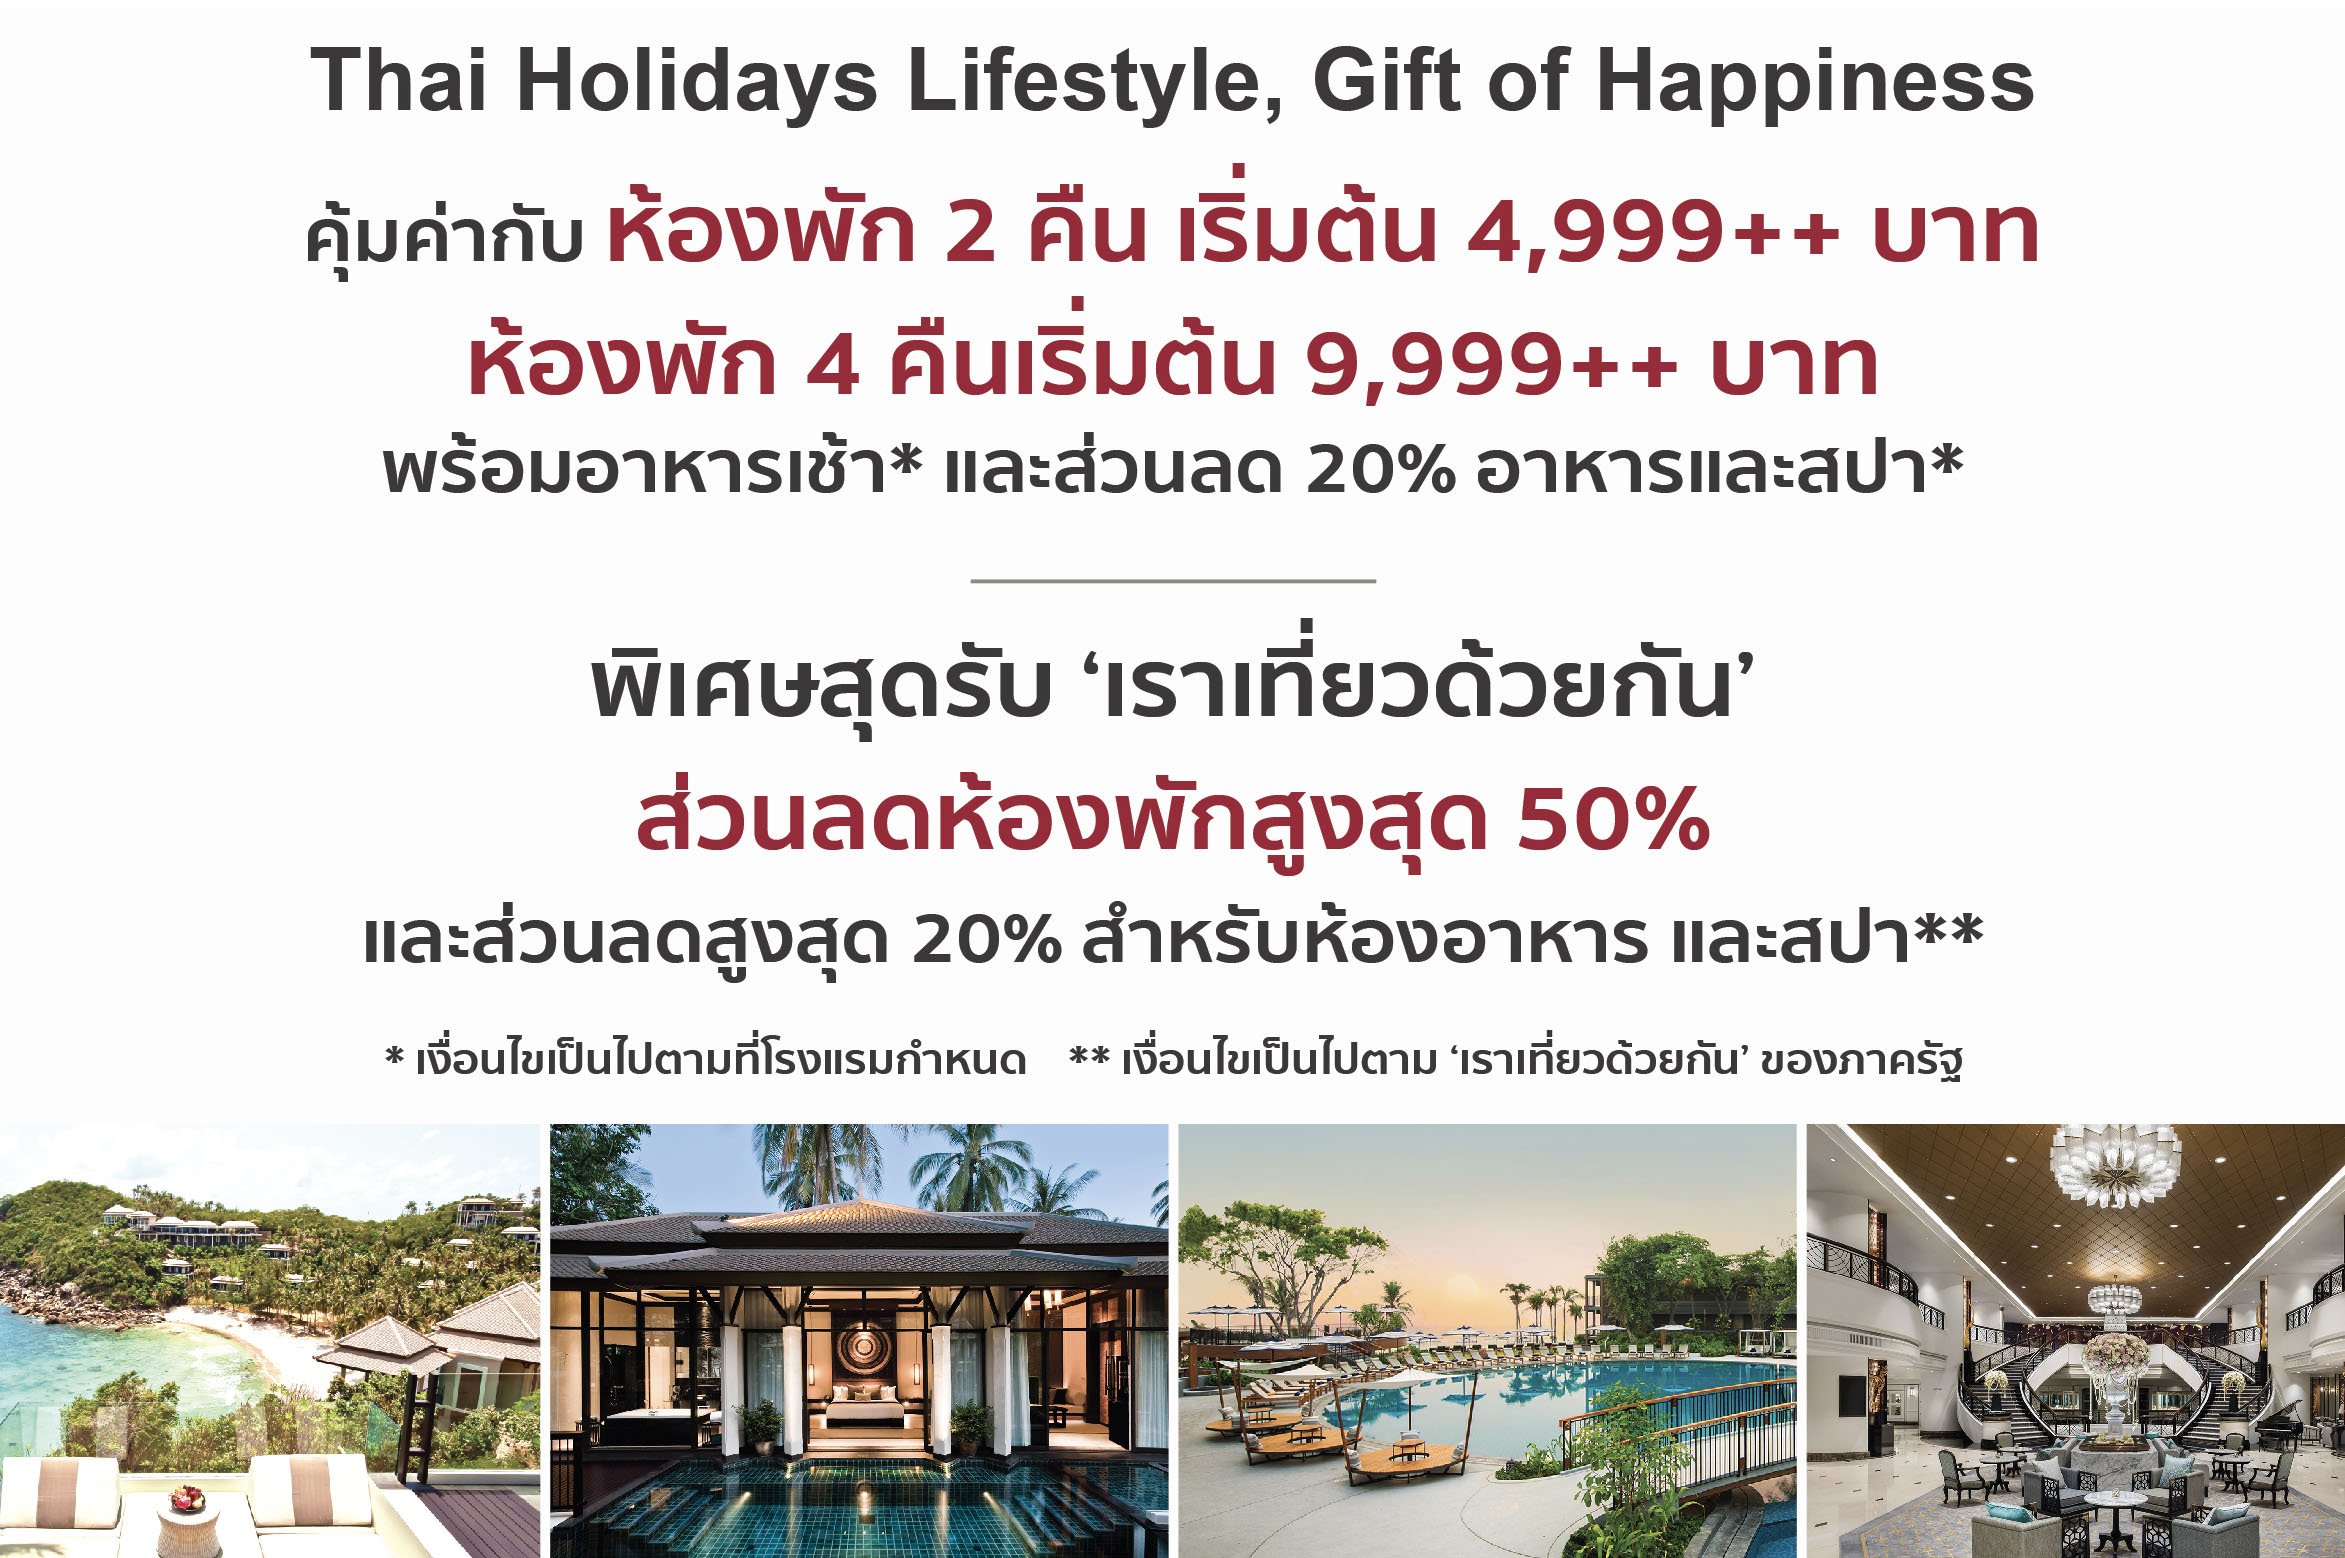 AWC celebrates the re-opening of its 16 affiliated hotels across Thailand with double special campaigns